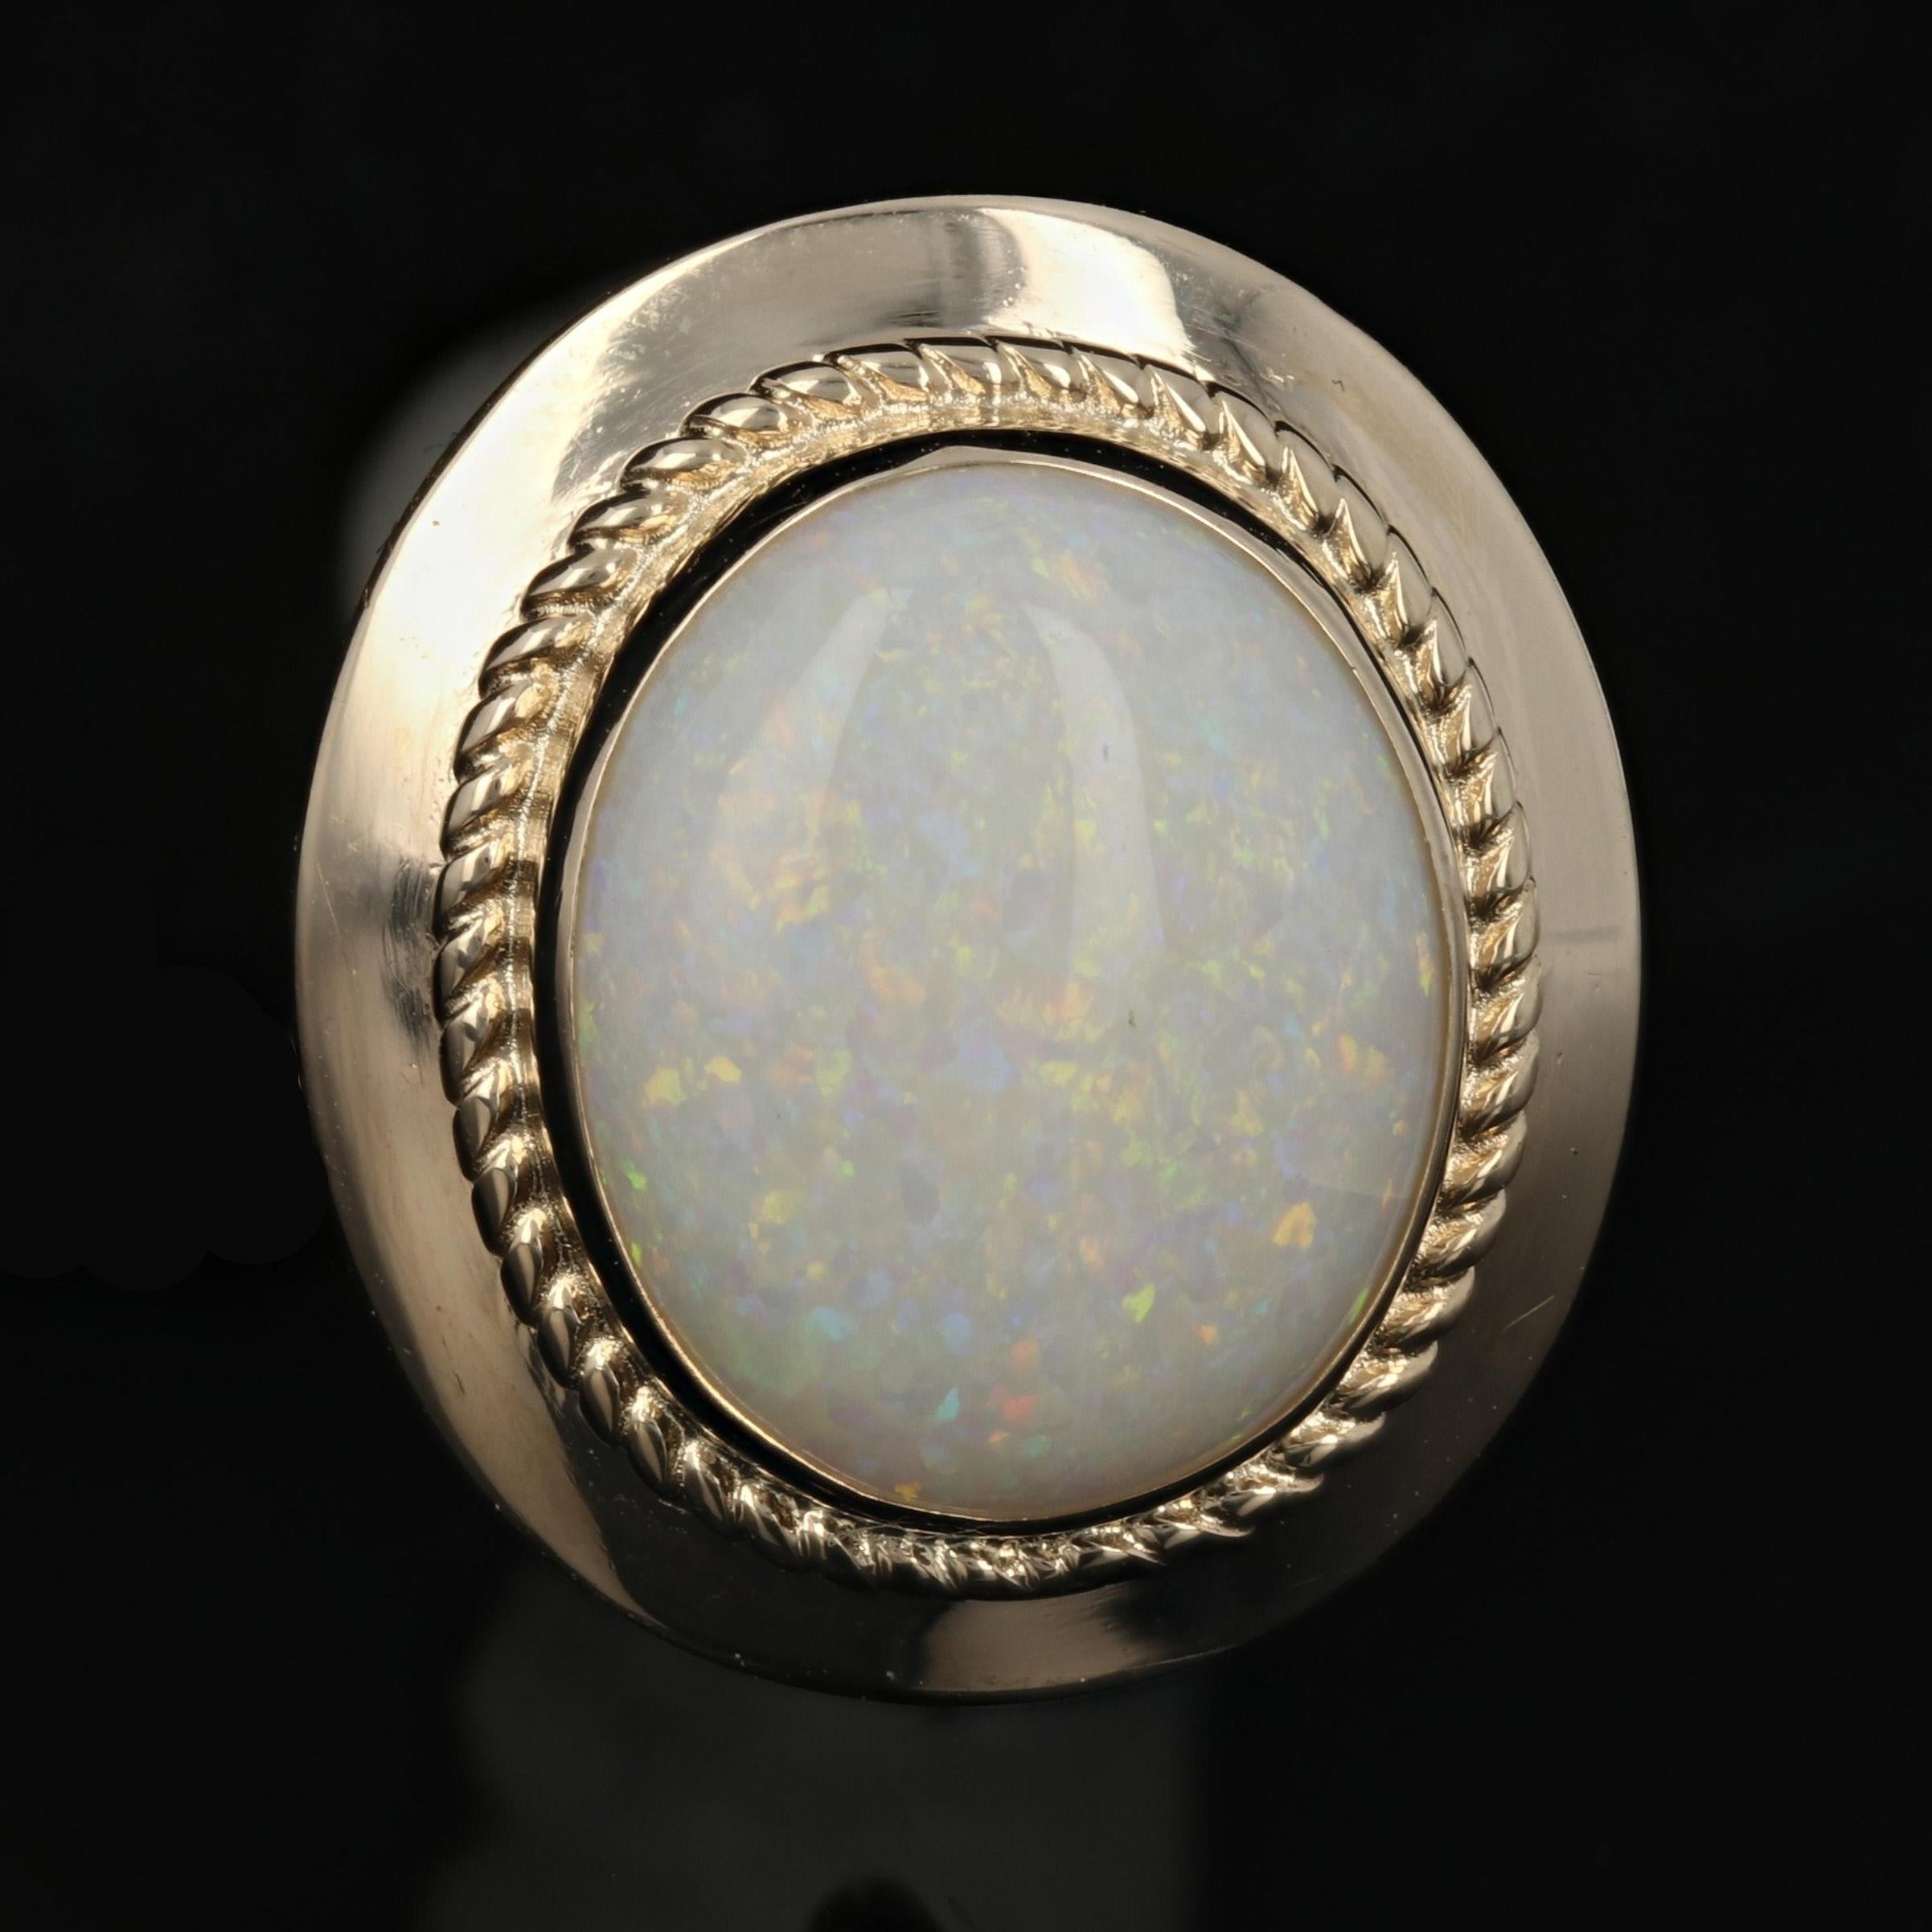 Metal Content: Guaranteed 14k Gold as stamped

Stone Information: 
Genuine Opals
Cut: Oval Cabochon
Total Carat(s): 6.20ctw

Measurements: 
Tall: 23/32